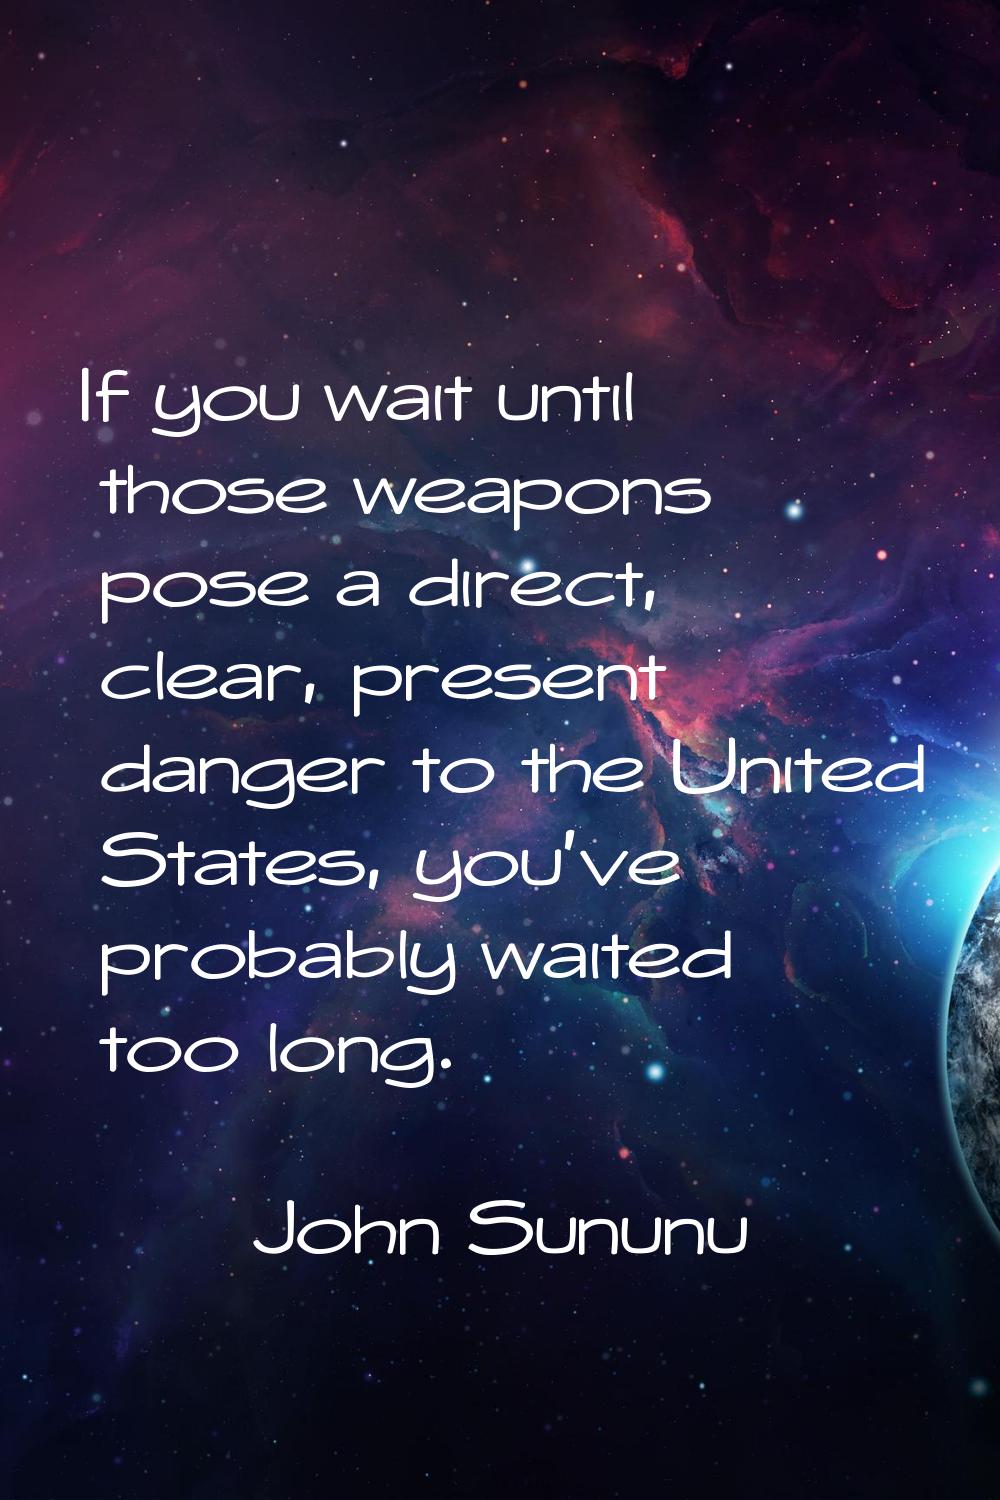 If you wait until those weapons pose a direct, clear, present danger to the United States, you've p